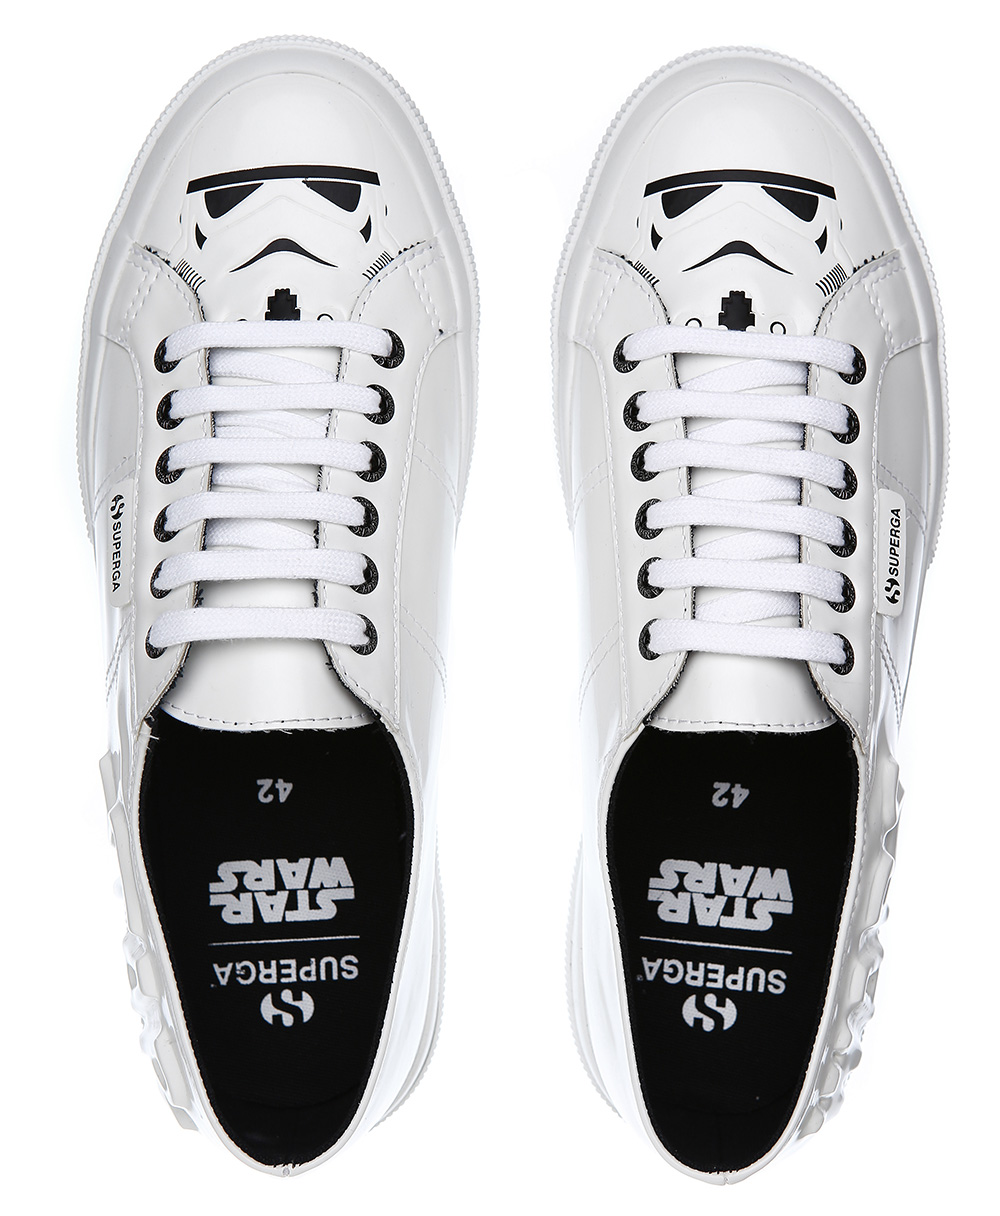 Original Trilogy Still Triumphs with These Superga Star Wars Shoes ...